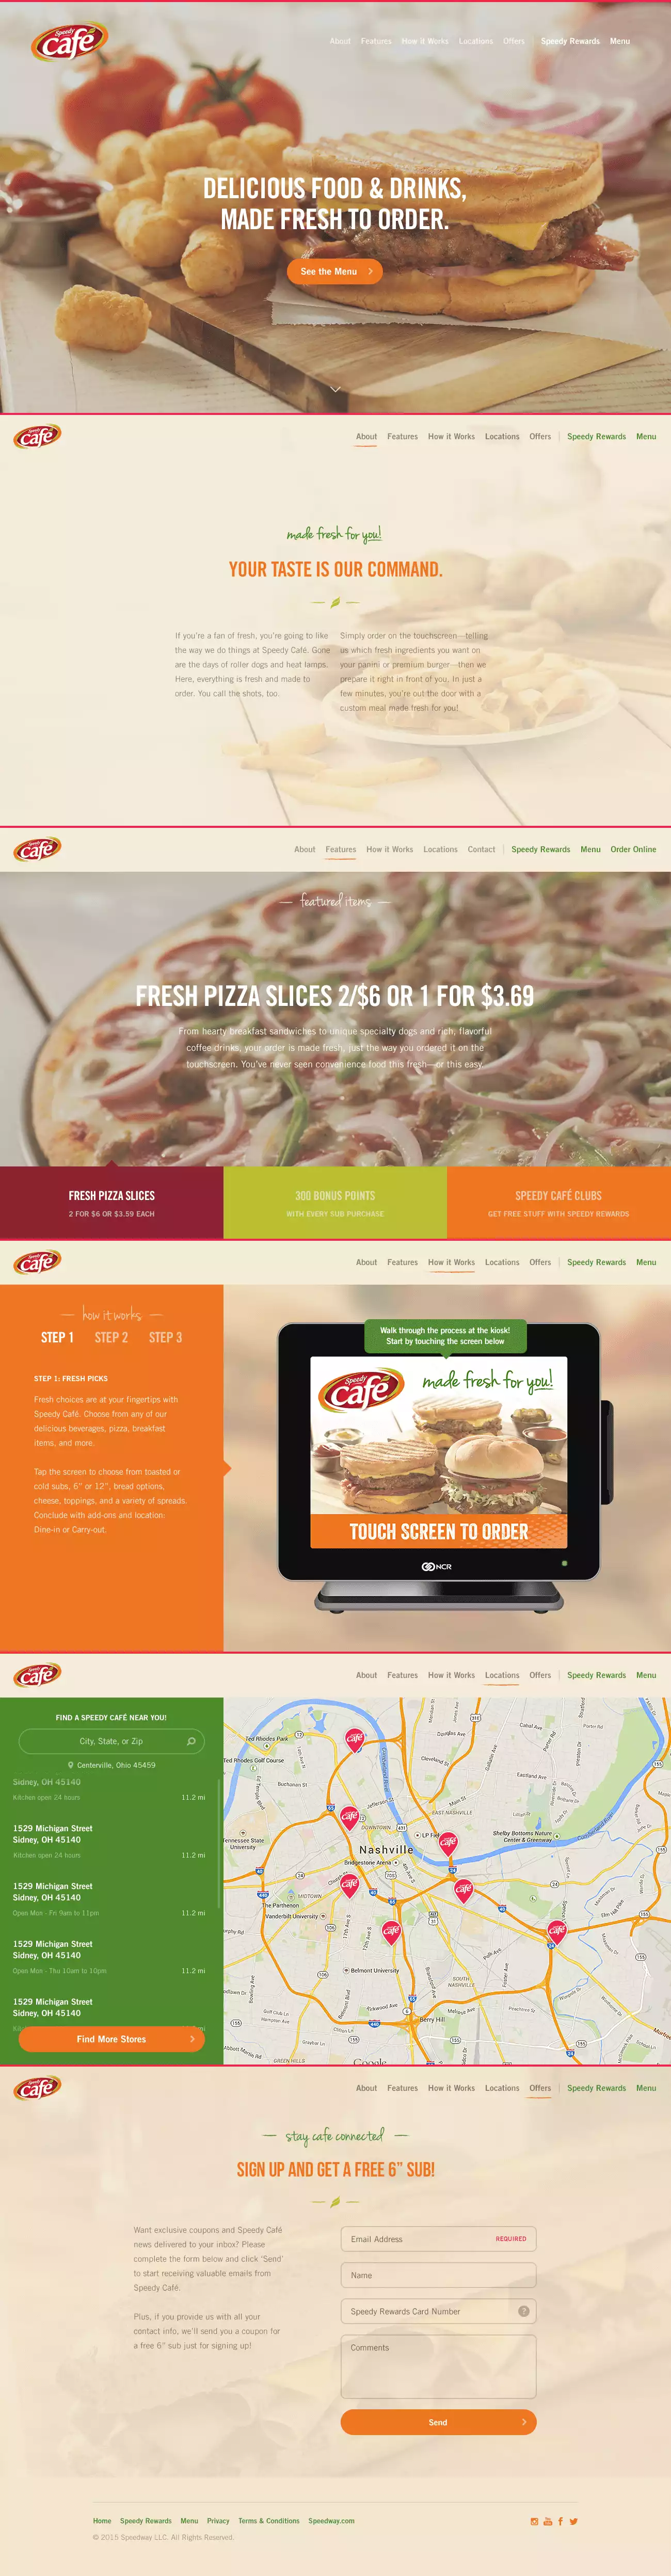 Speedy Cafe Home Page